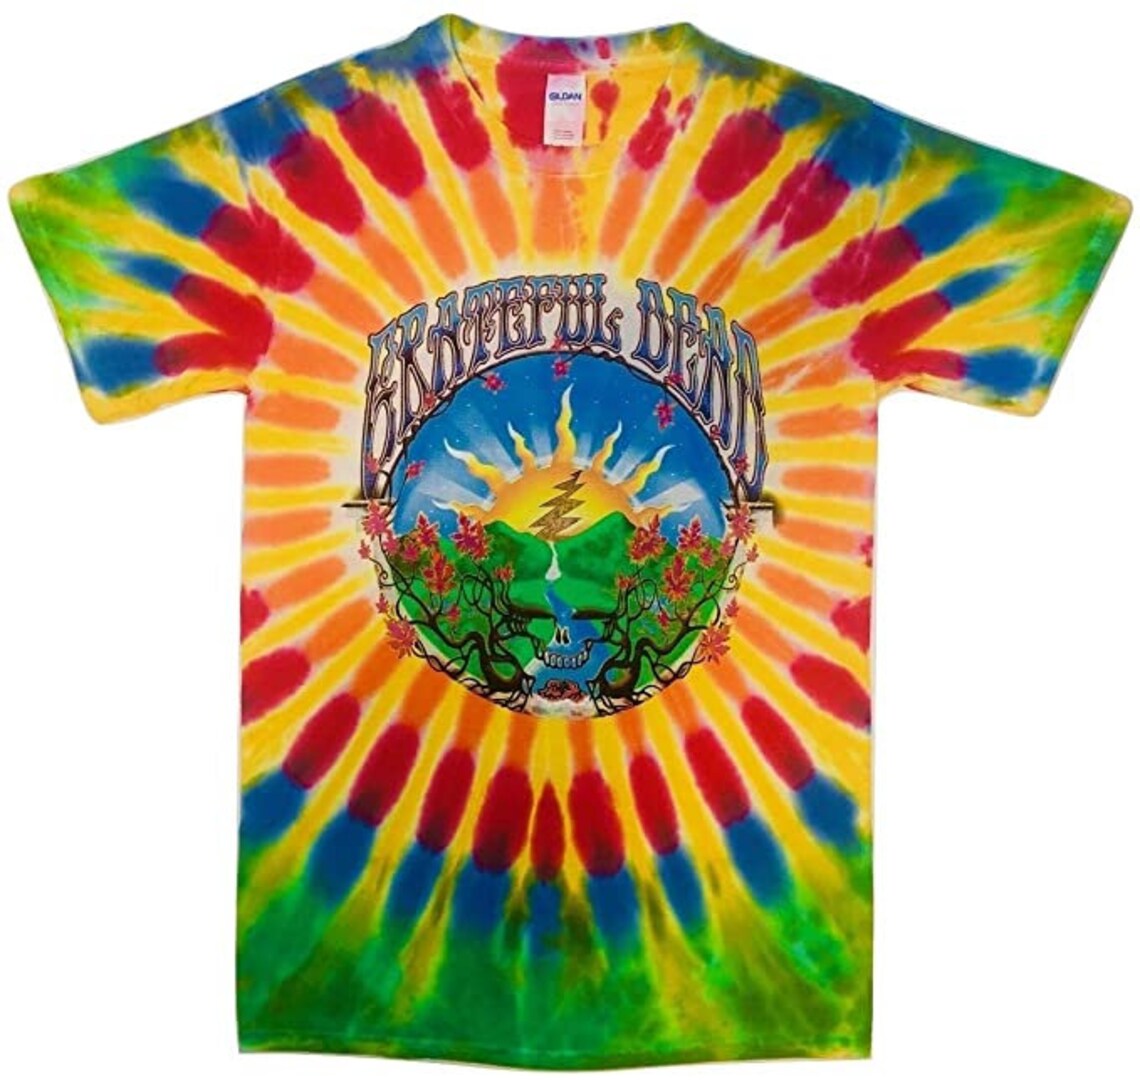 Giant Dead Head Steal Your Face T-shirt